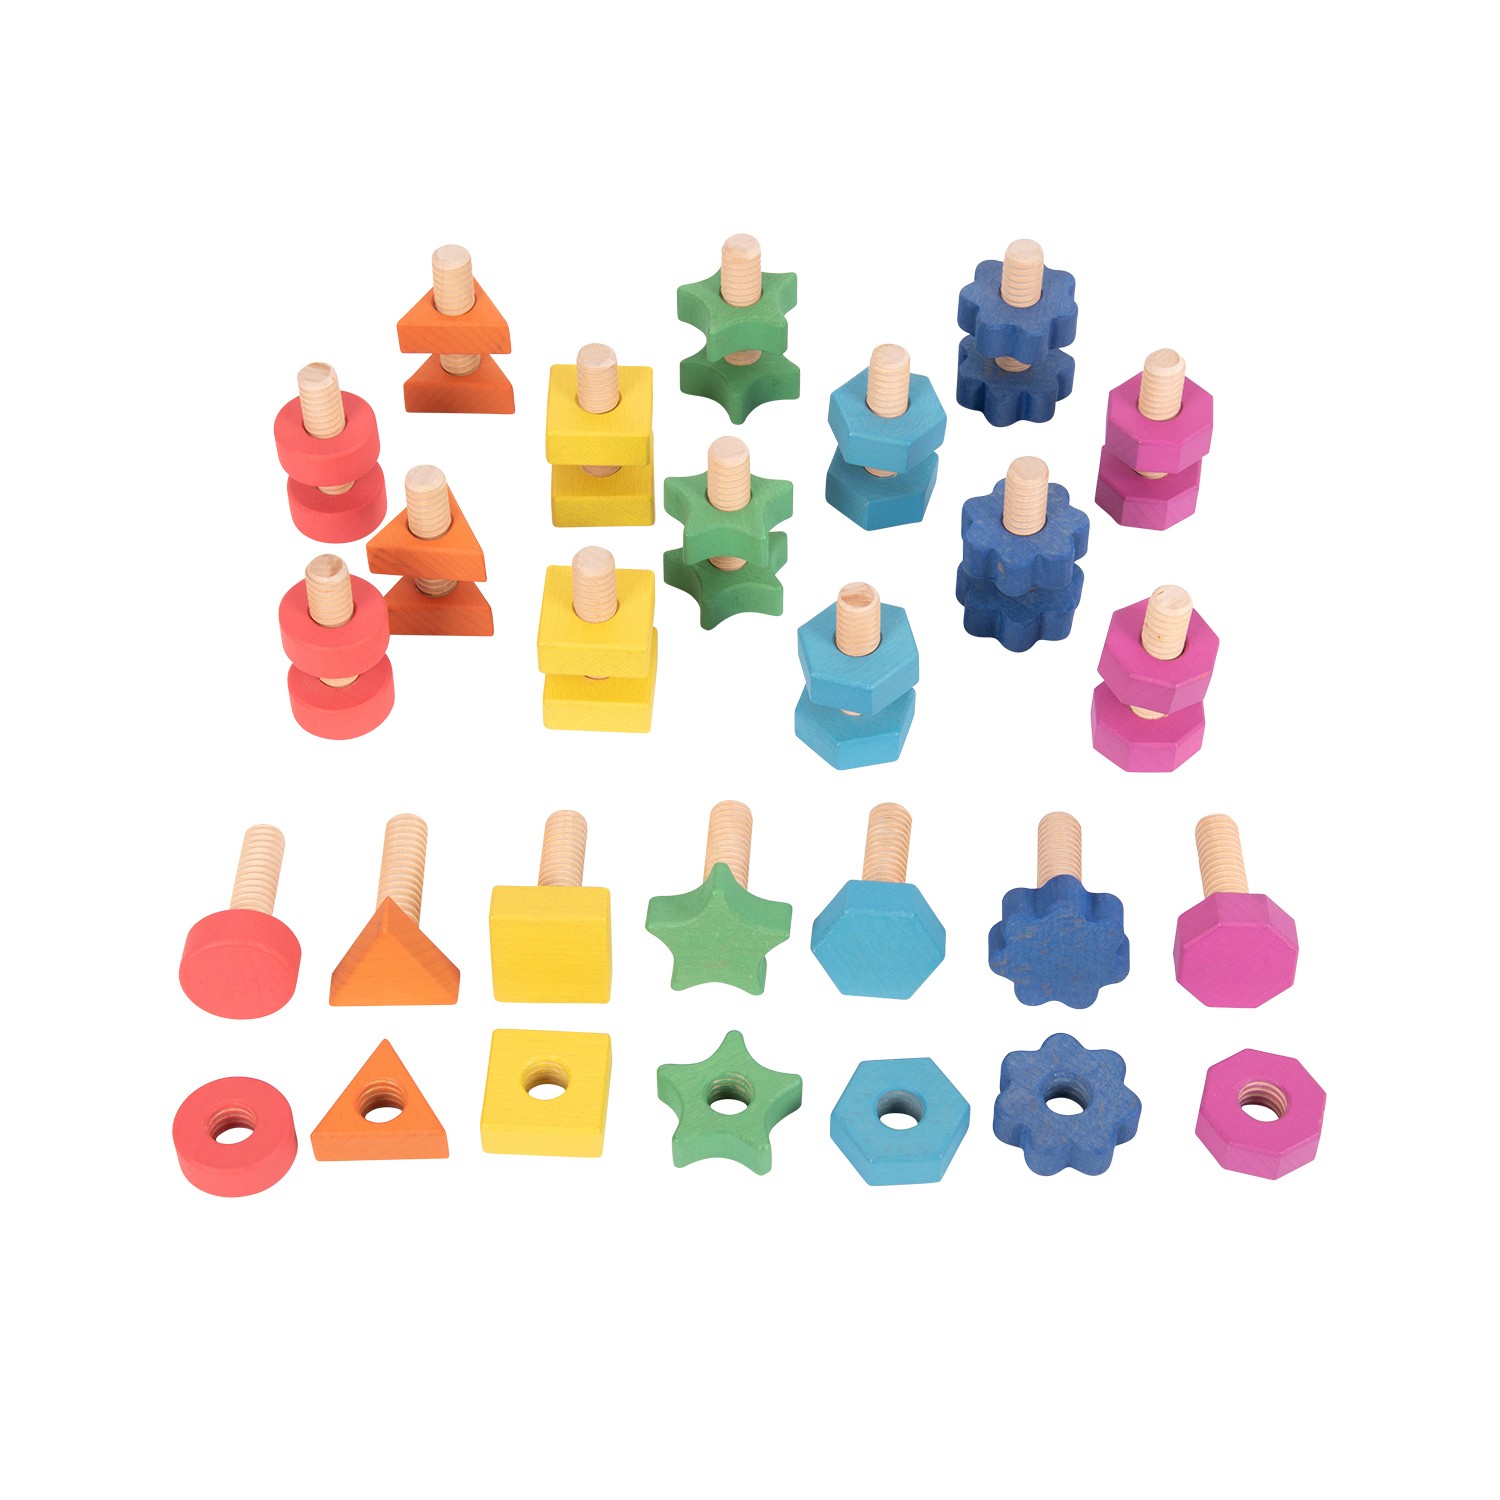 Rainbow Wooden Nuts & Bolts - Set of 21 Pairs - 7 Shapes and Colors - For Ages 12m+ - Loose Parts Wooden Toys for Toddlers and P